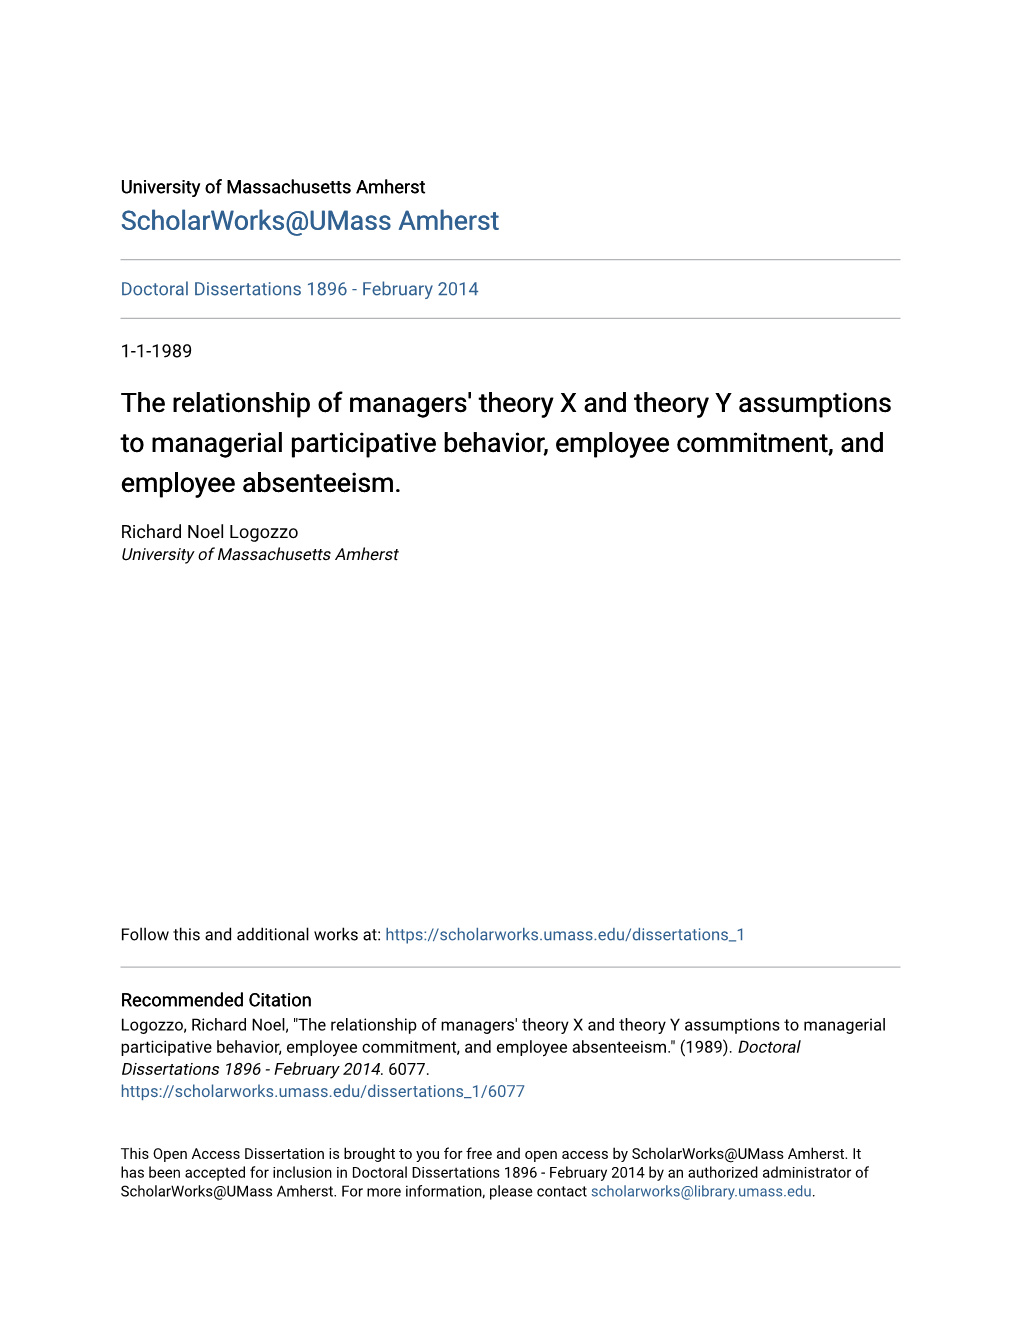 The Relationship of Managers' Theory X and Theory Y Assumptions to Managerial Participative Behavior, Employee Commitment, and Employee Absenteeism